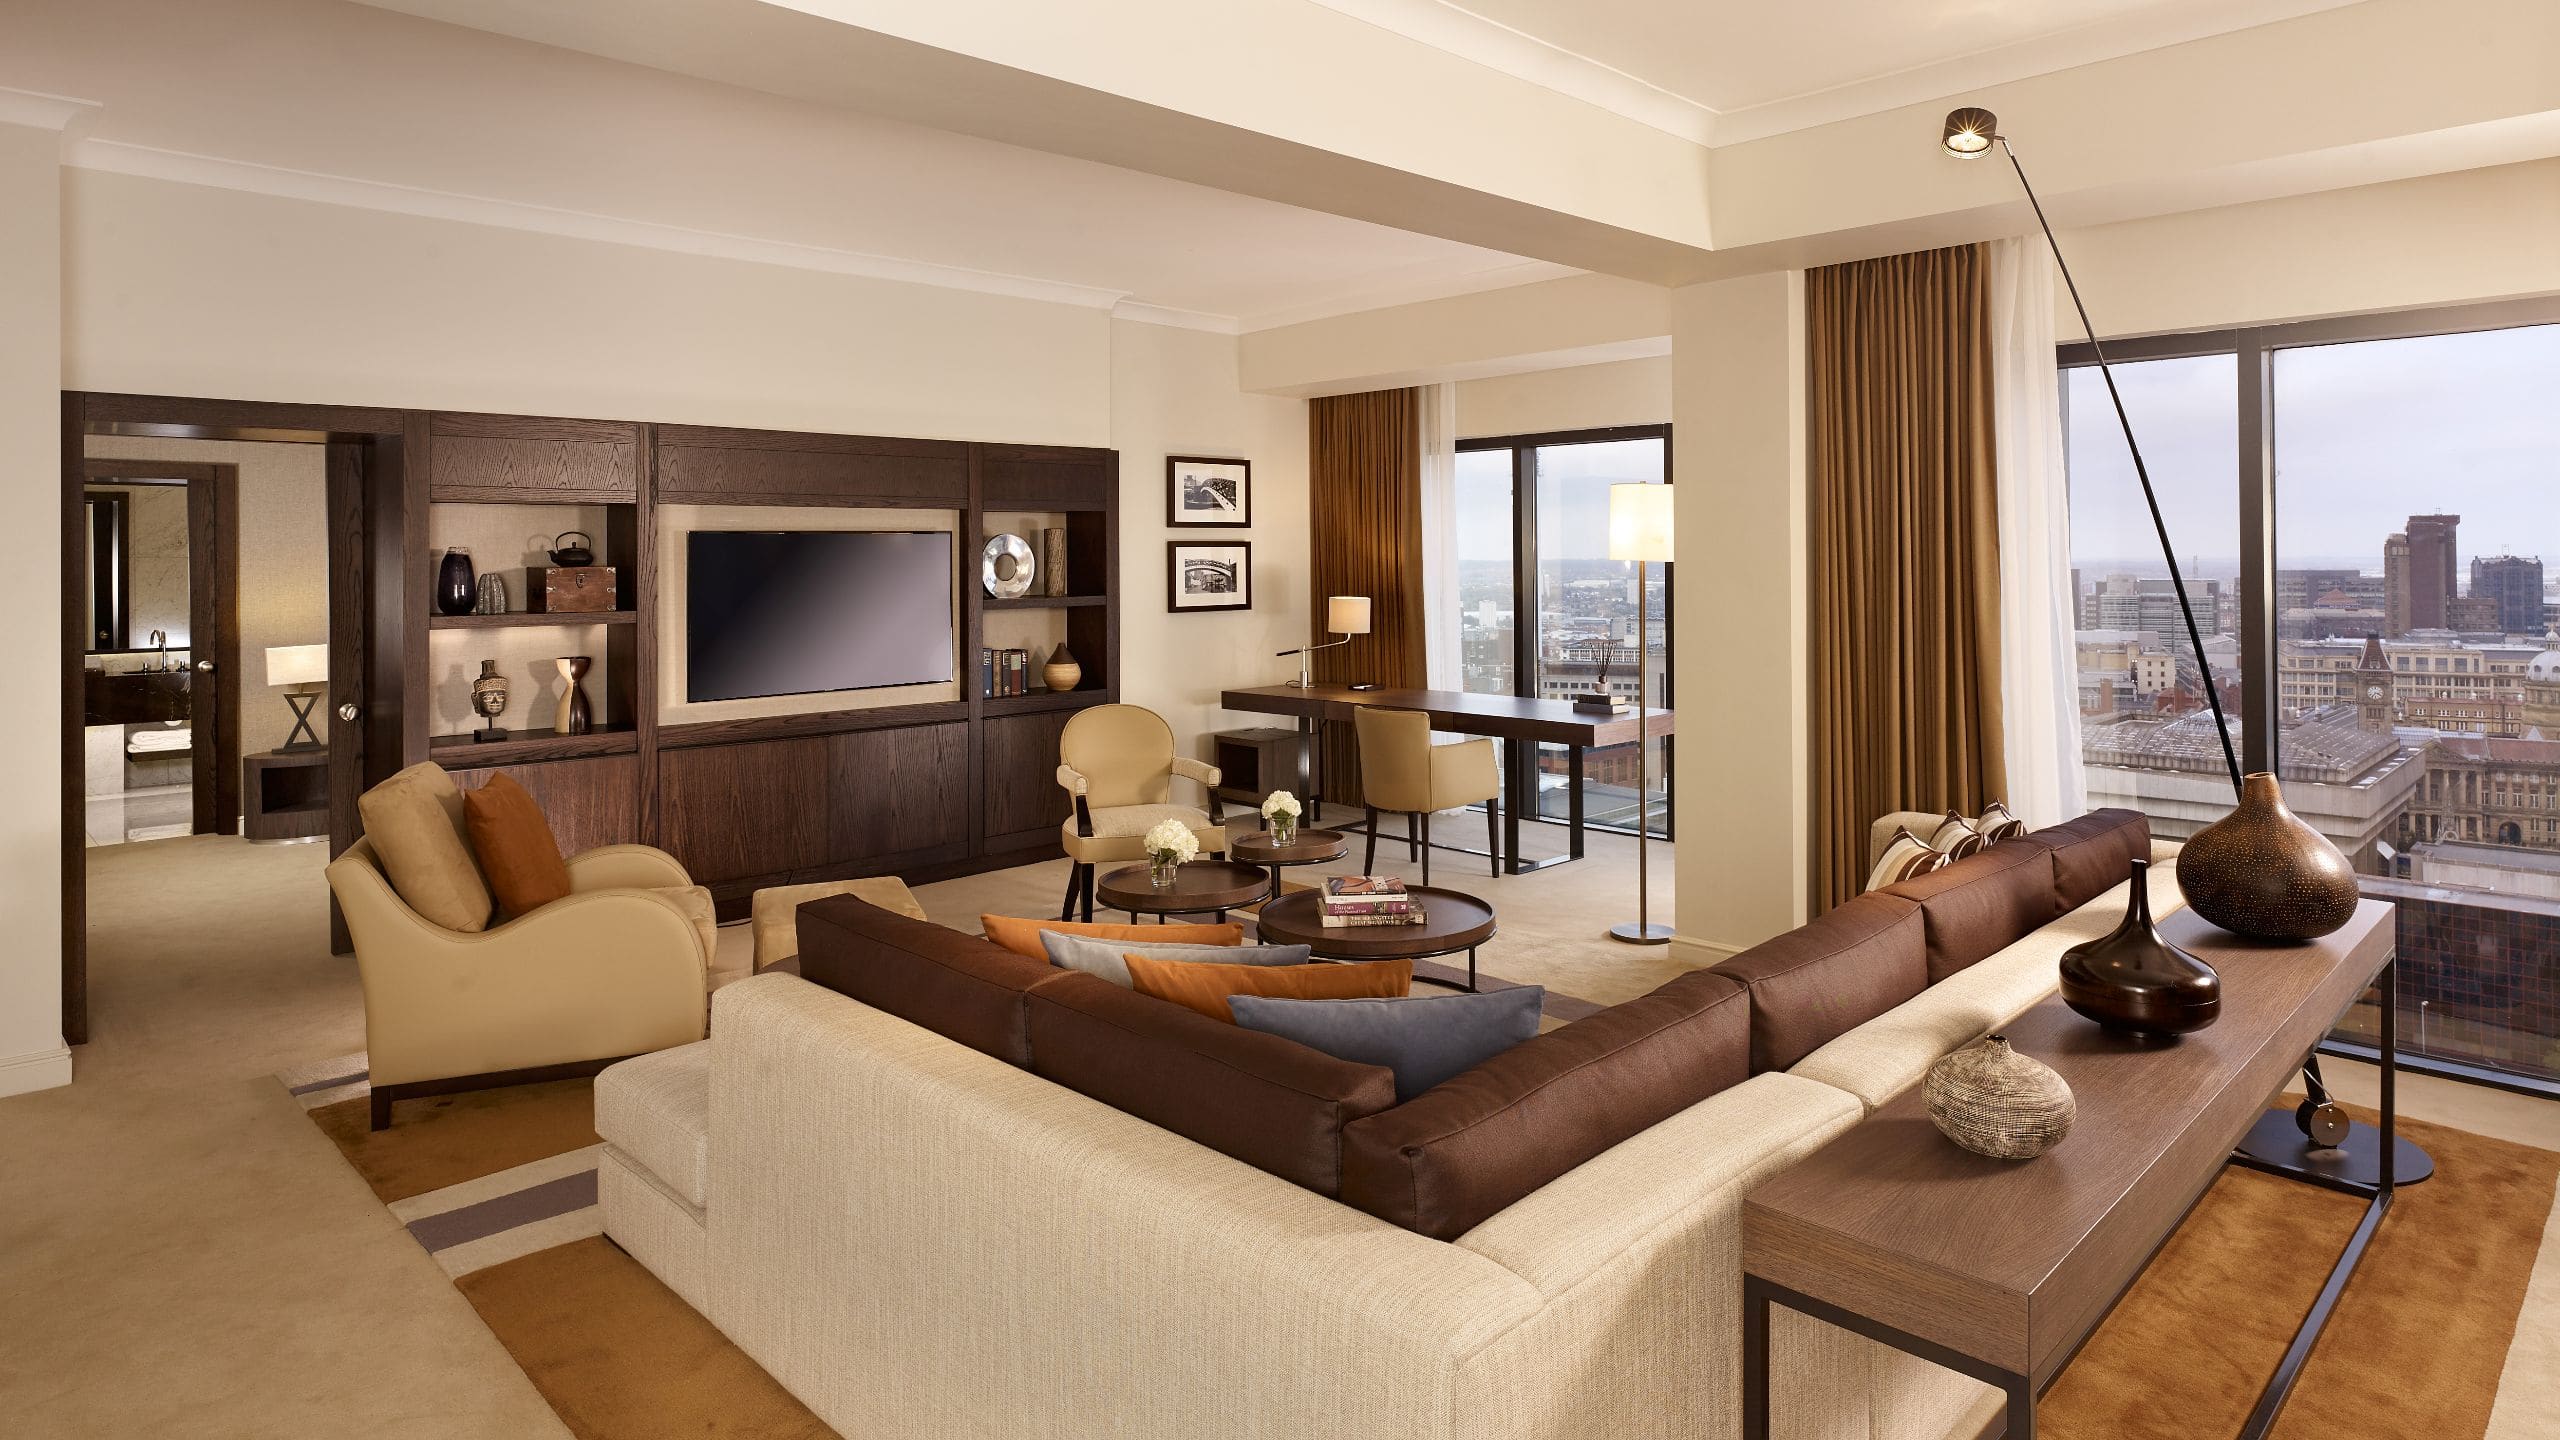 Suite with massive sofa, armchairs, coffee table and TV